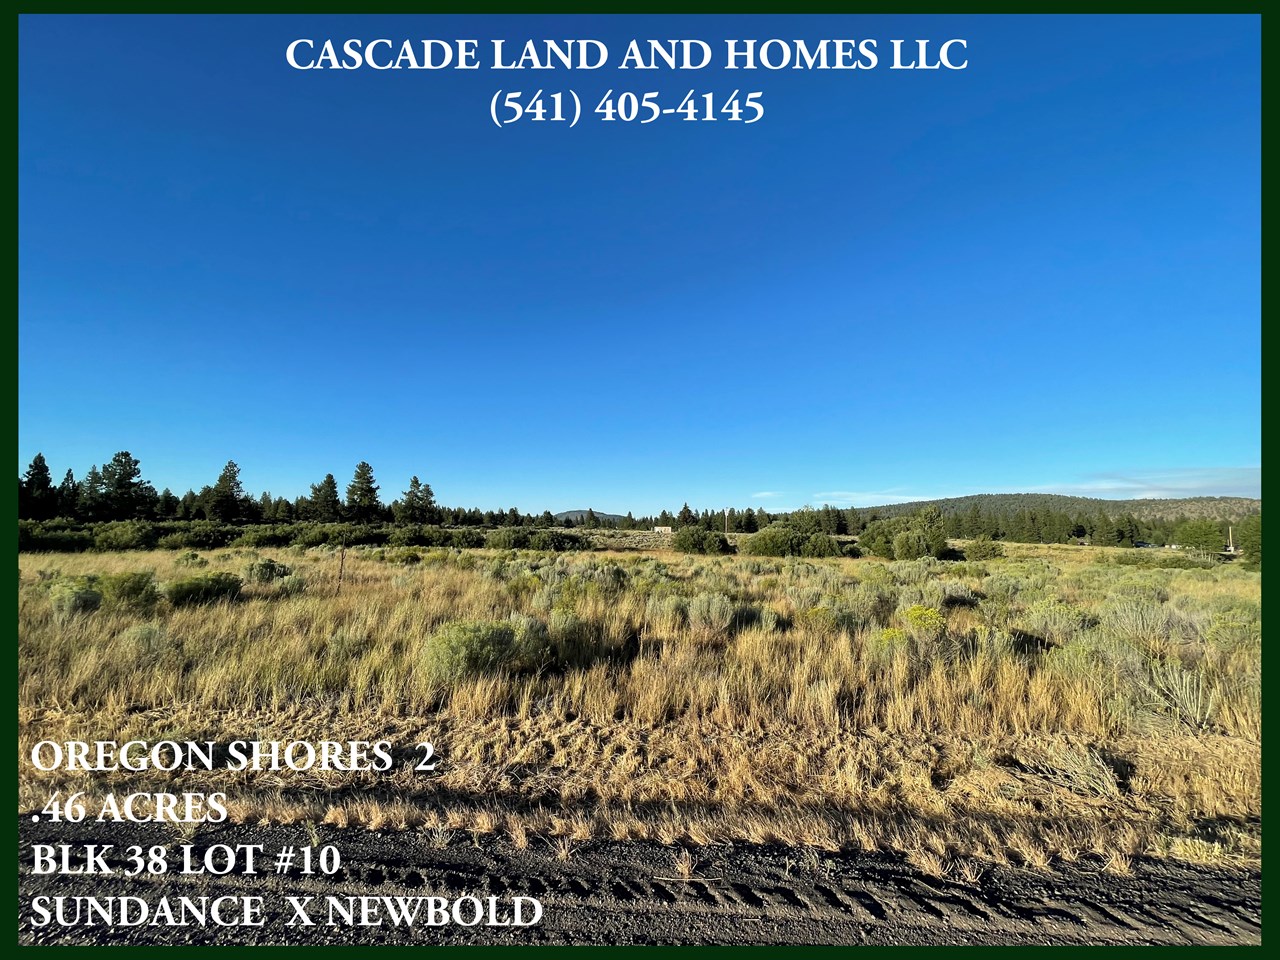 this property has beautiful territorial views of the surrounding foothills that lead to agency lake. in the springtime it is covered with and endless wave of colorful wildflowers!